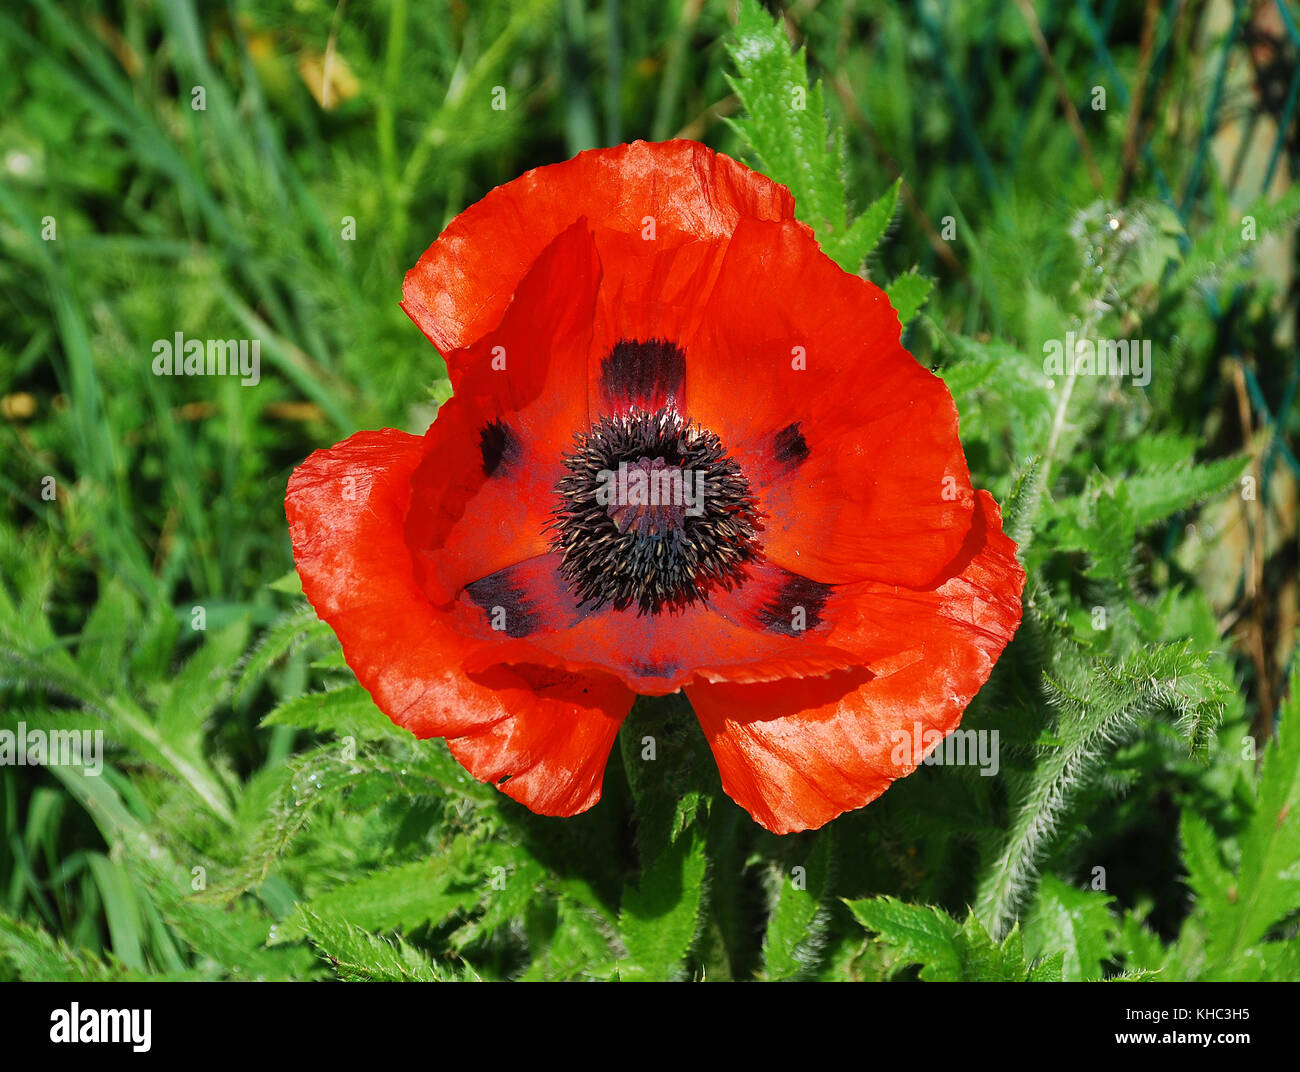 A giant red poppy in natural sunlight with various grasses and other plants in the background. Photographed in north east Italy. Stock Photo